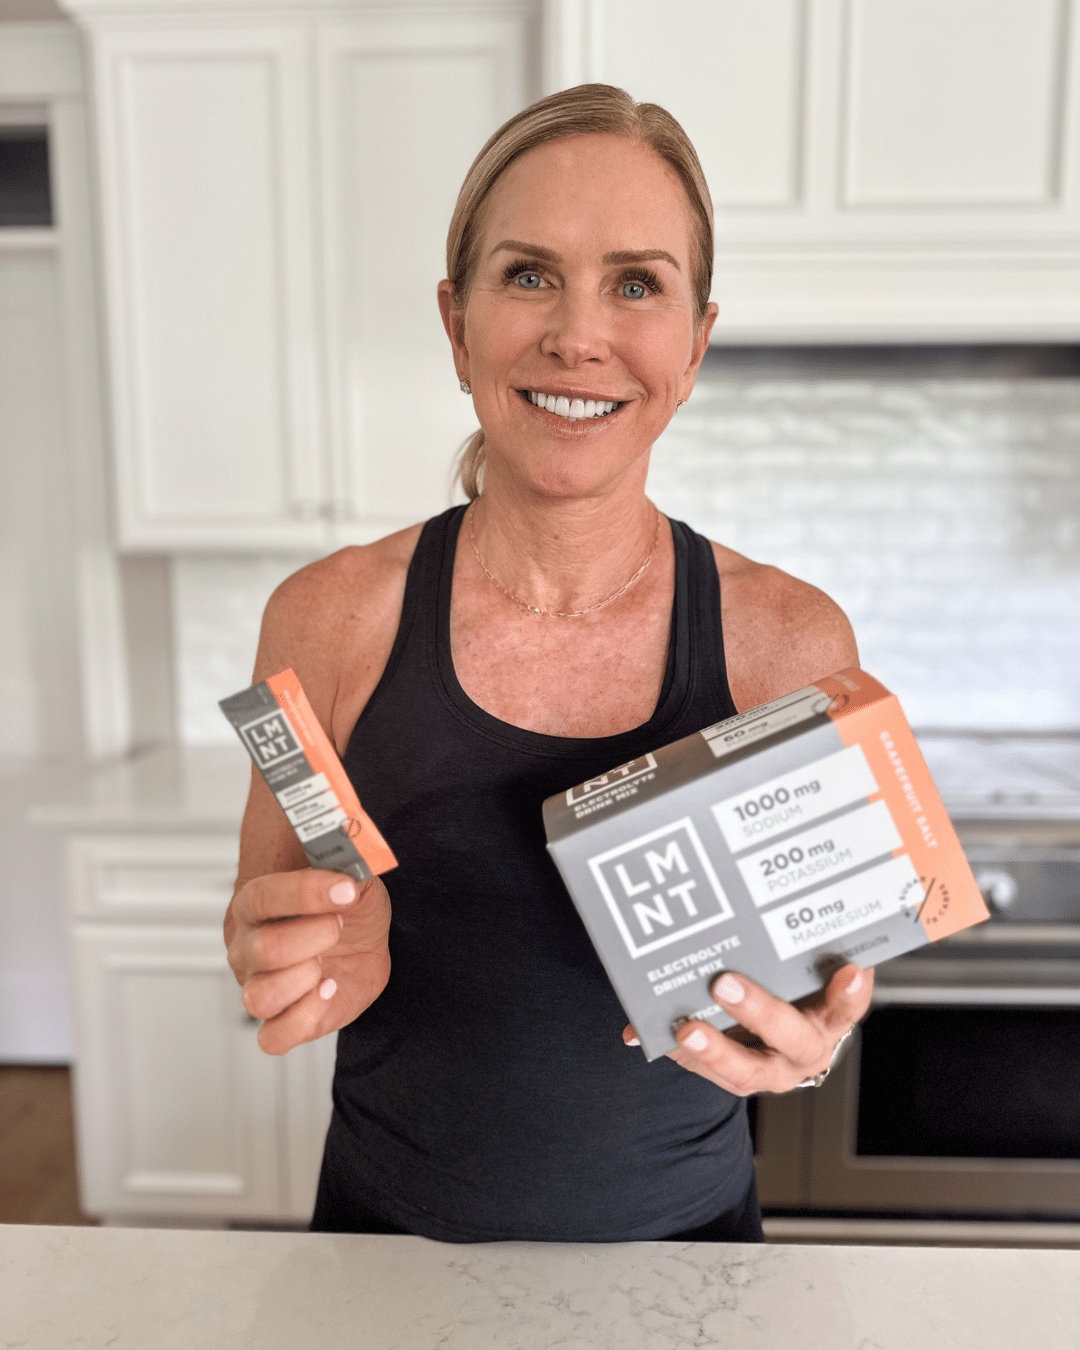 The Best Electrolyte Supplements And Why I Use Them